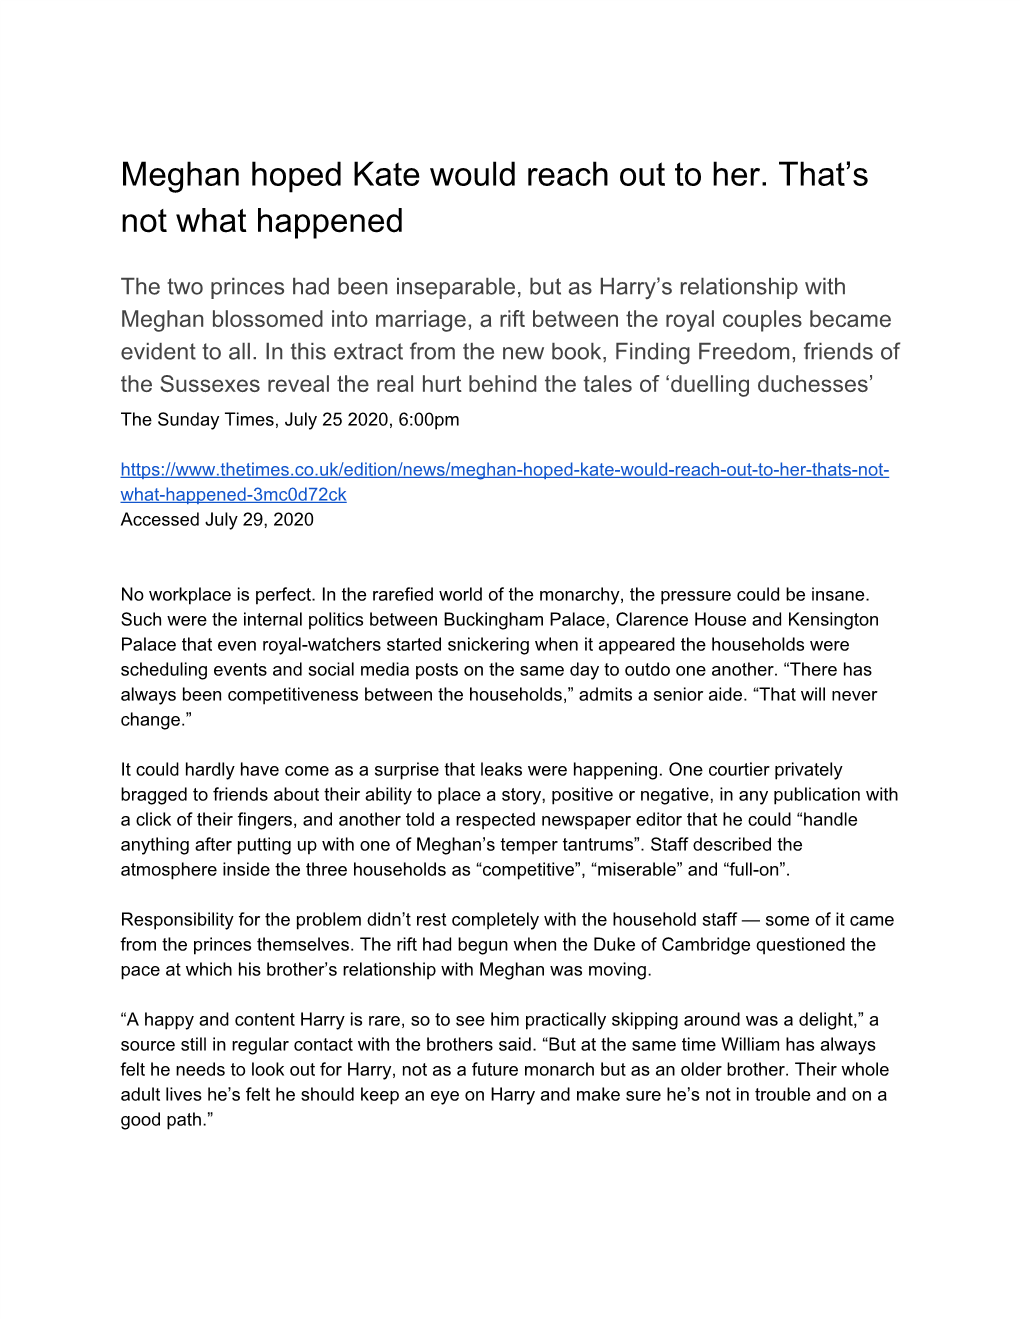 Meghan Hoped Kate Would Reach out to Her. That's Not What Happened